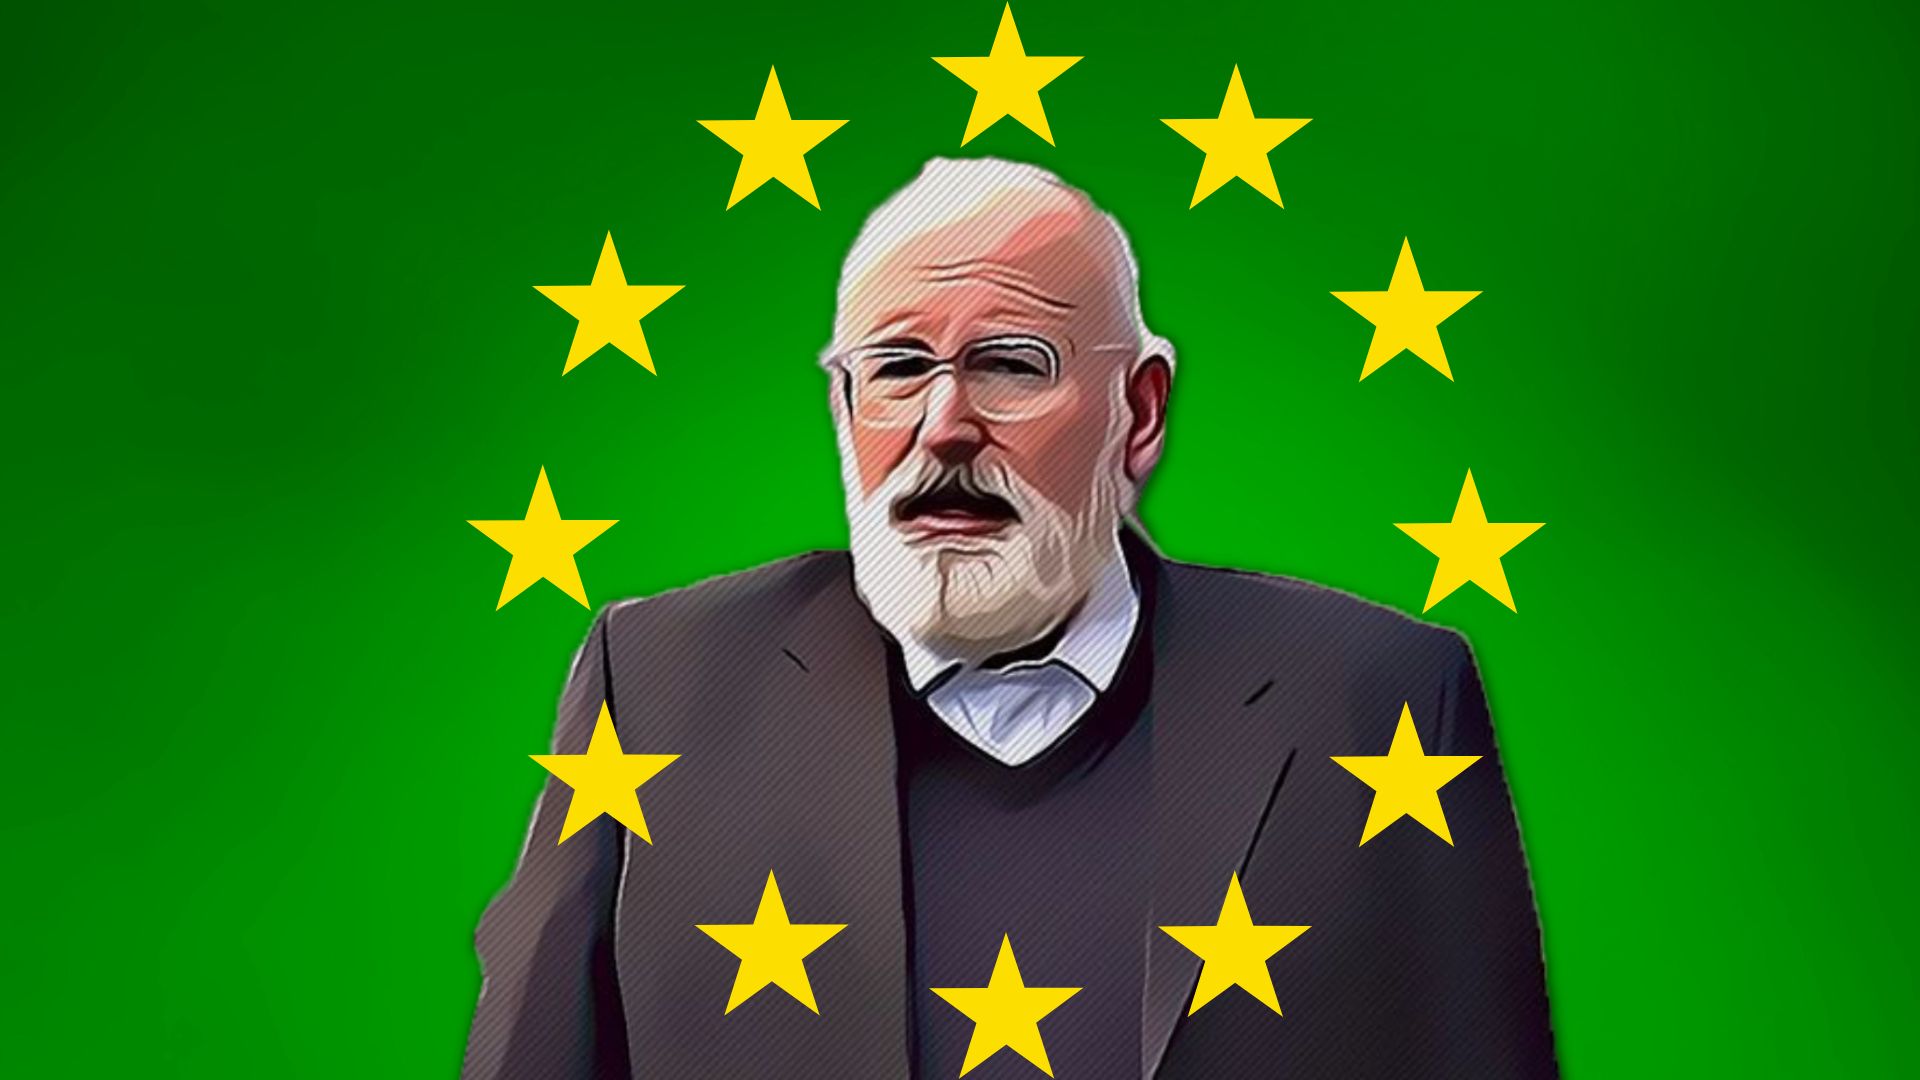 Frans Timmermans has resigned from the European Union